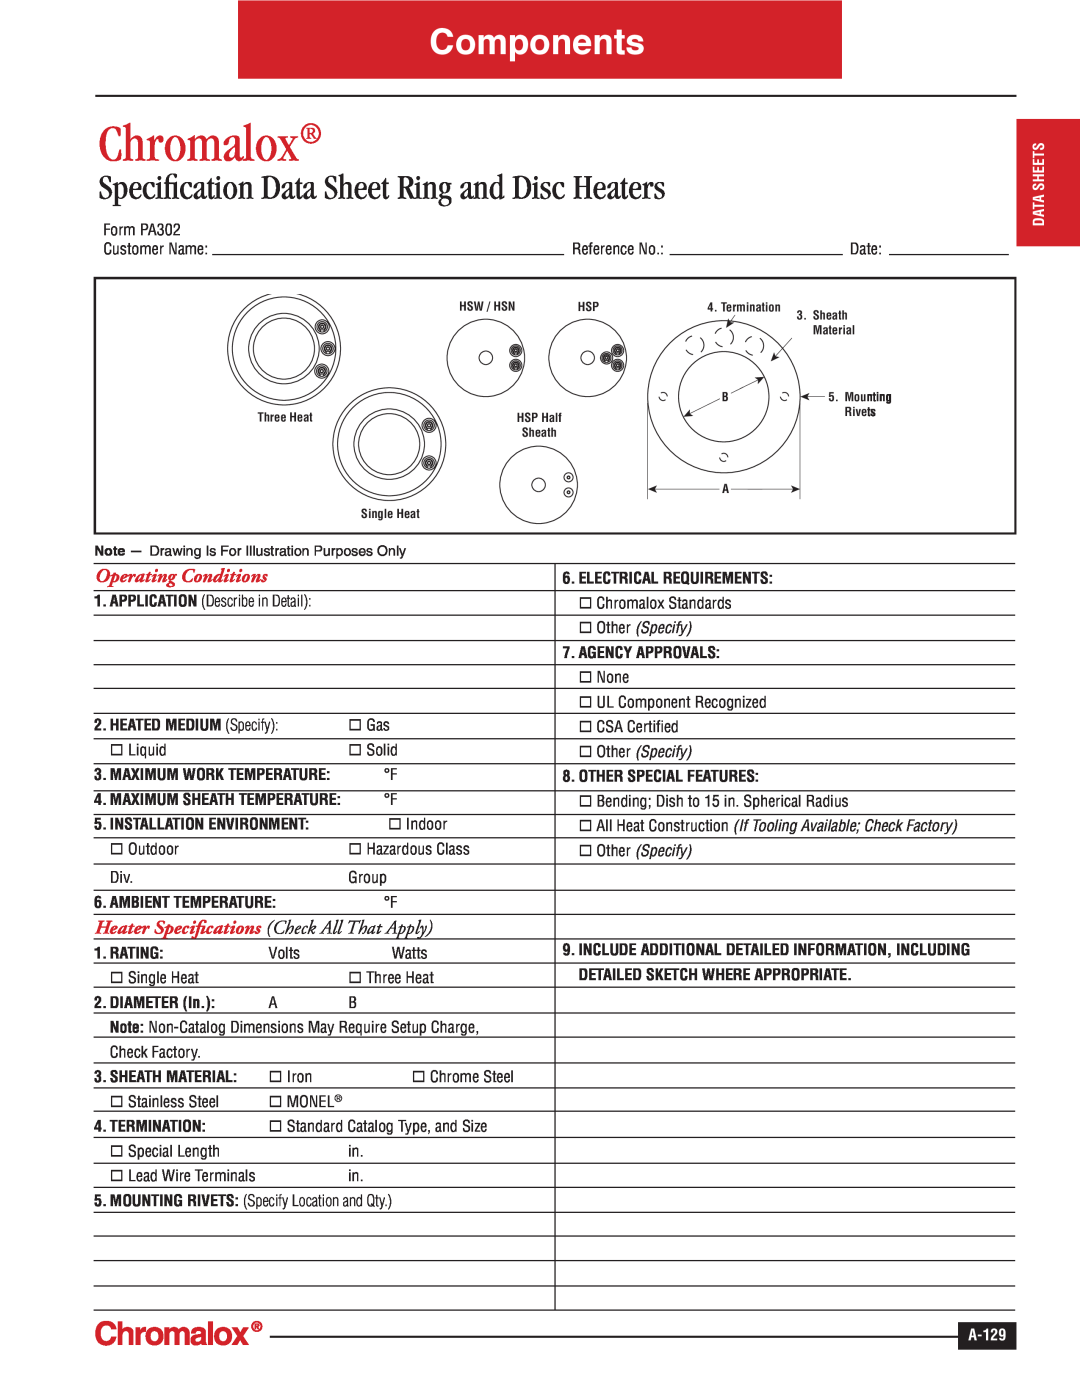 Chromalox A-129 specifications Chromalox, Components, Specification Data Sheet Ring and Disc Heaters, Operating Conditions 